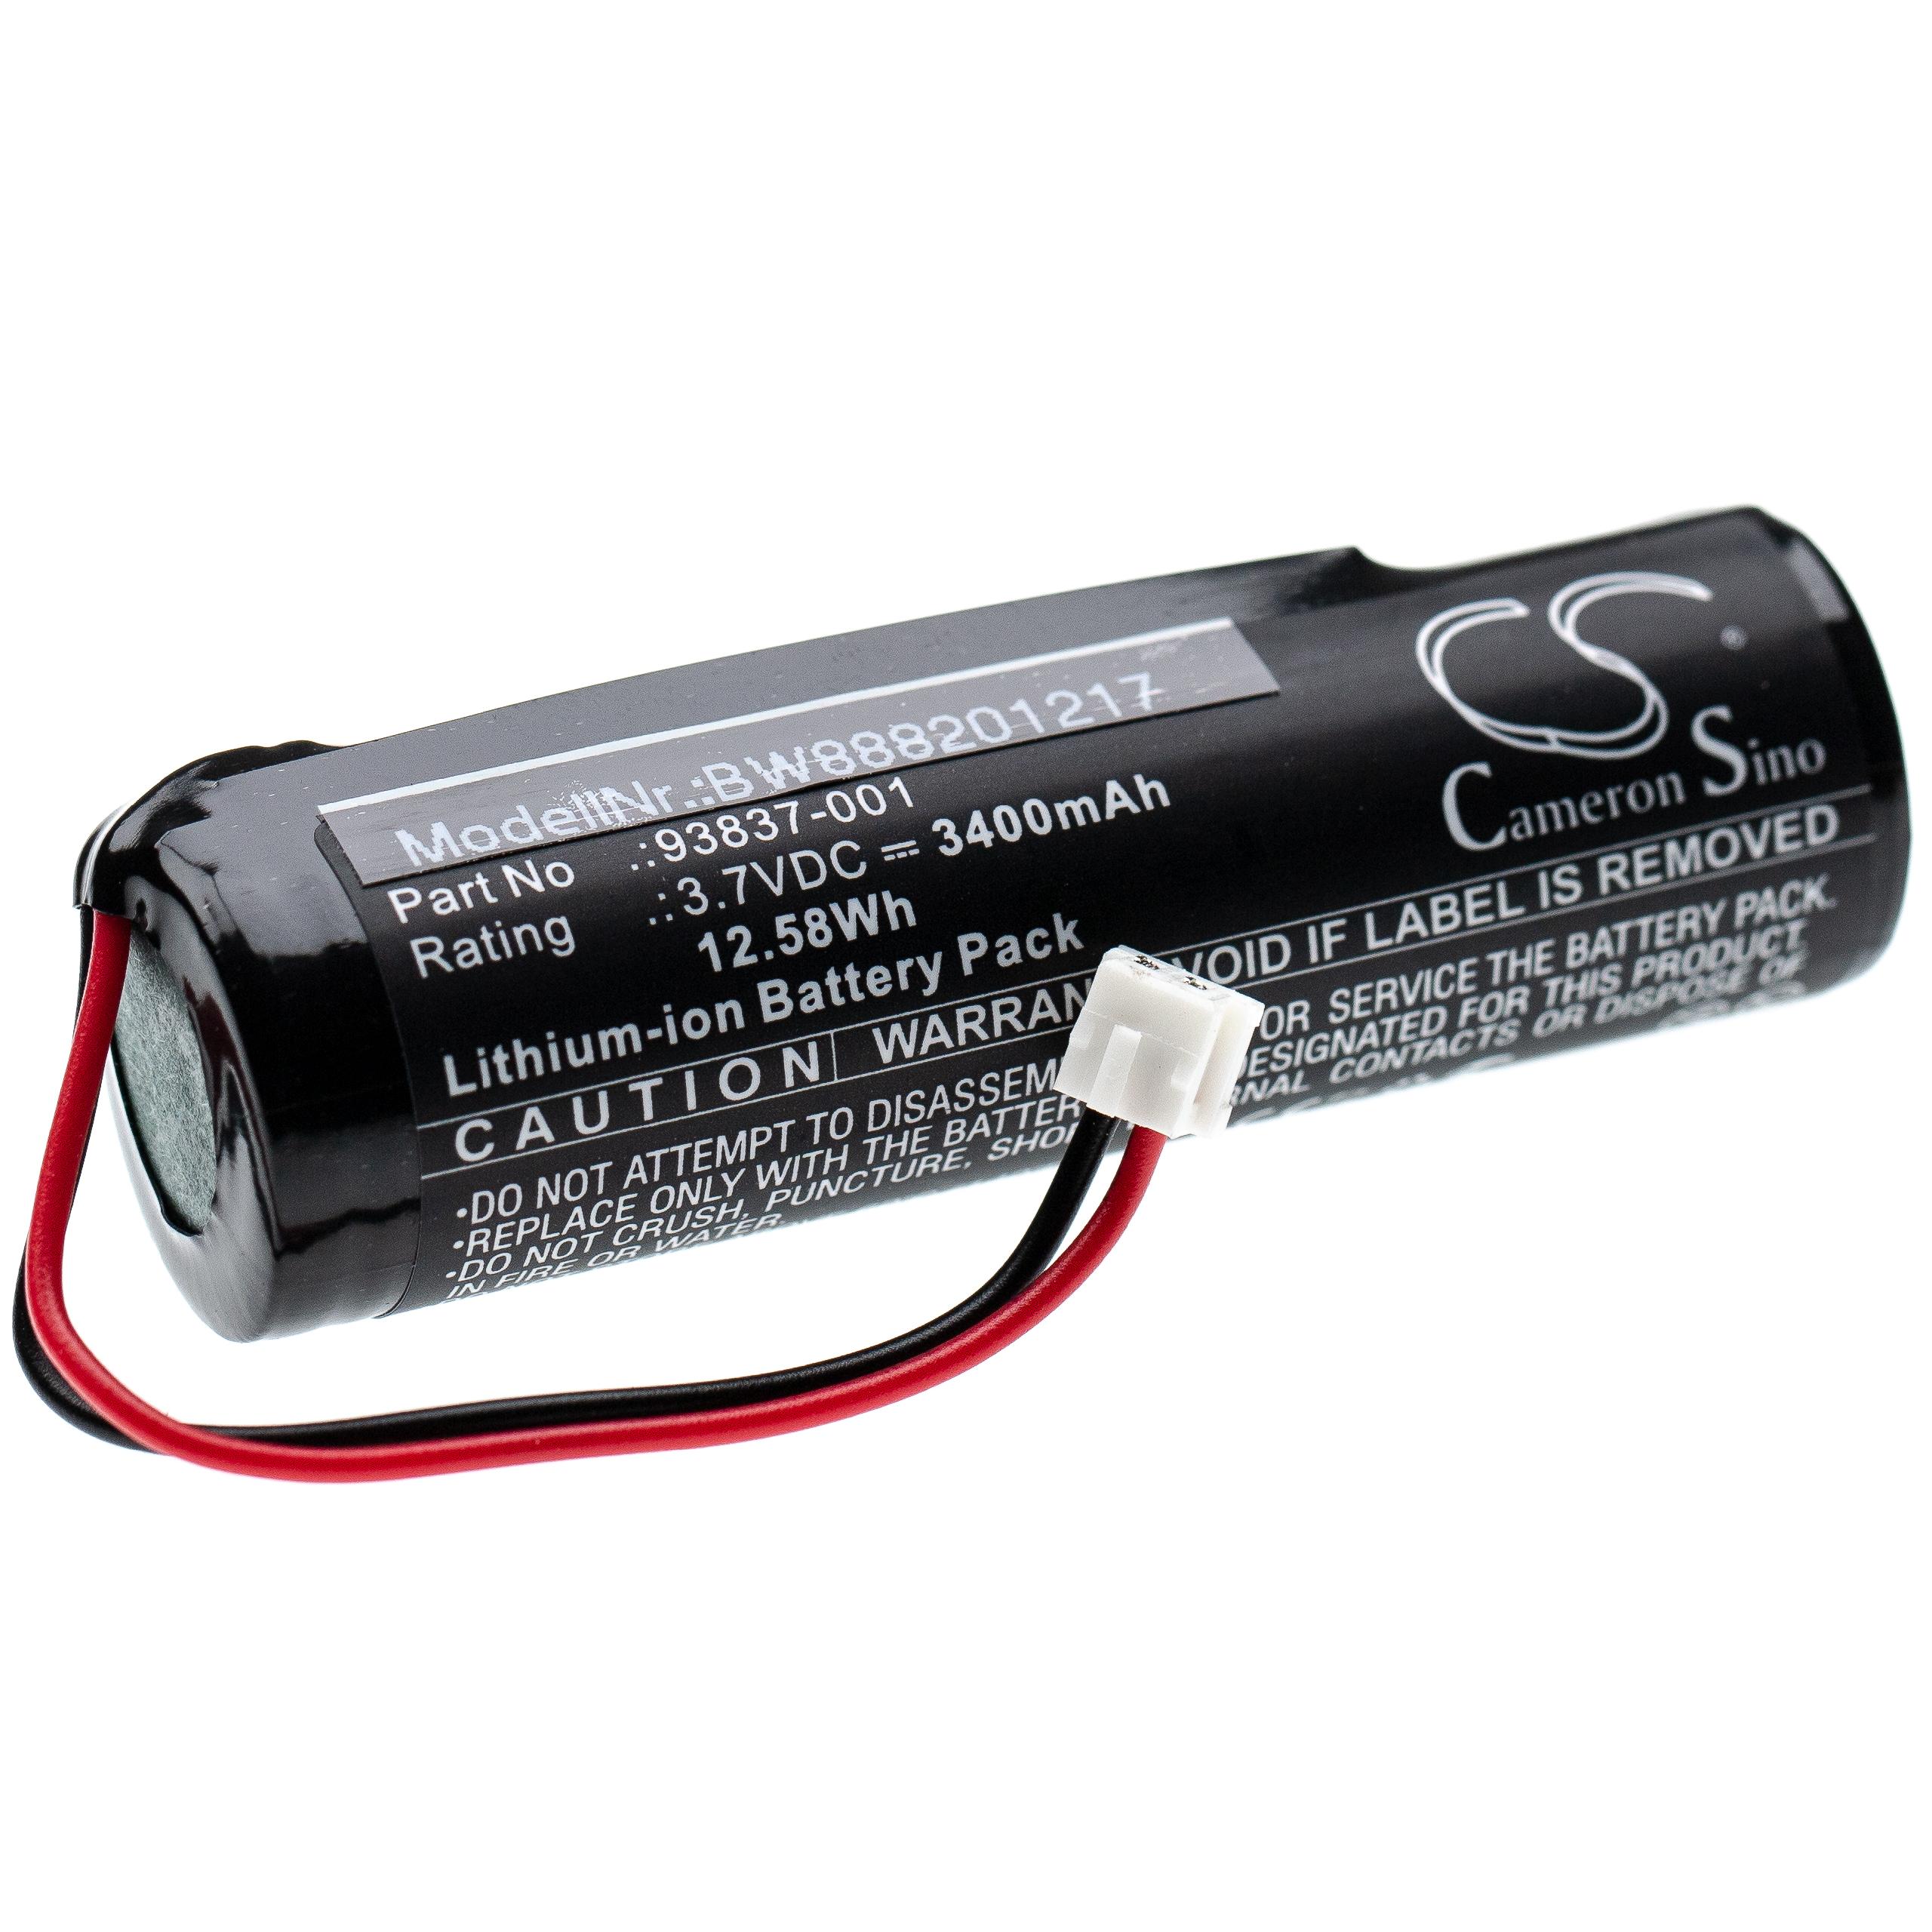 Electric Razor Battery Replacement for Wahl 93837-001, 93837-200 - 3400mAh 3.7V Li-Ion